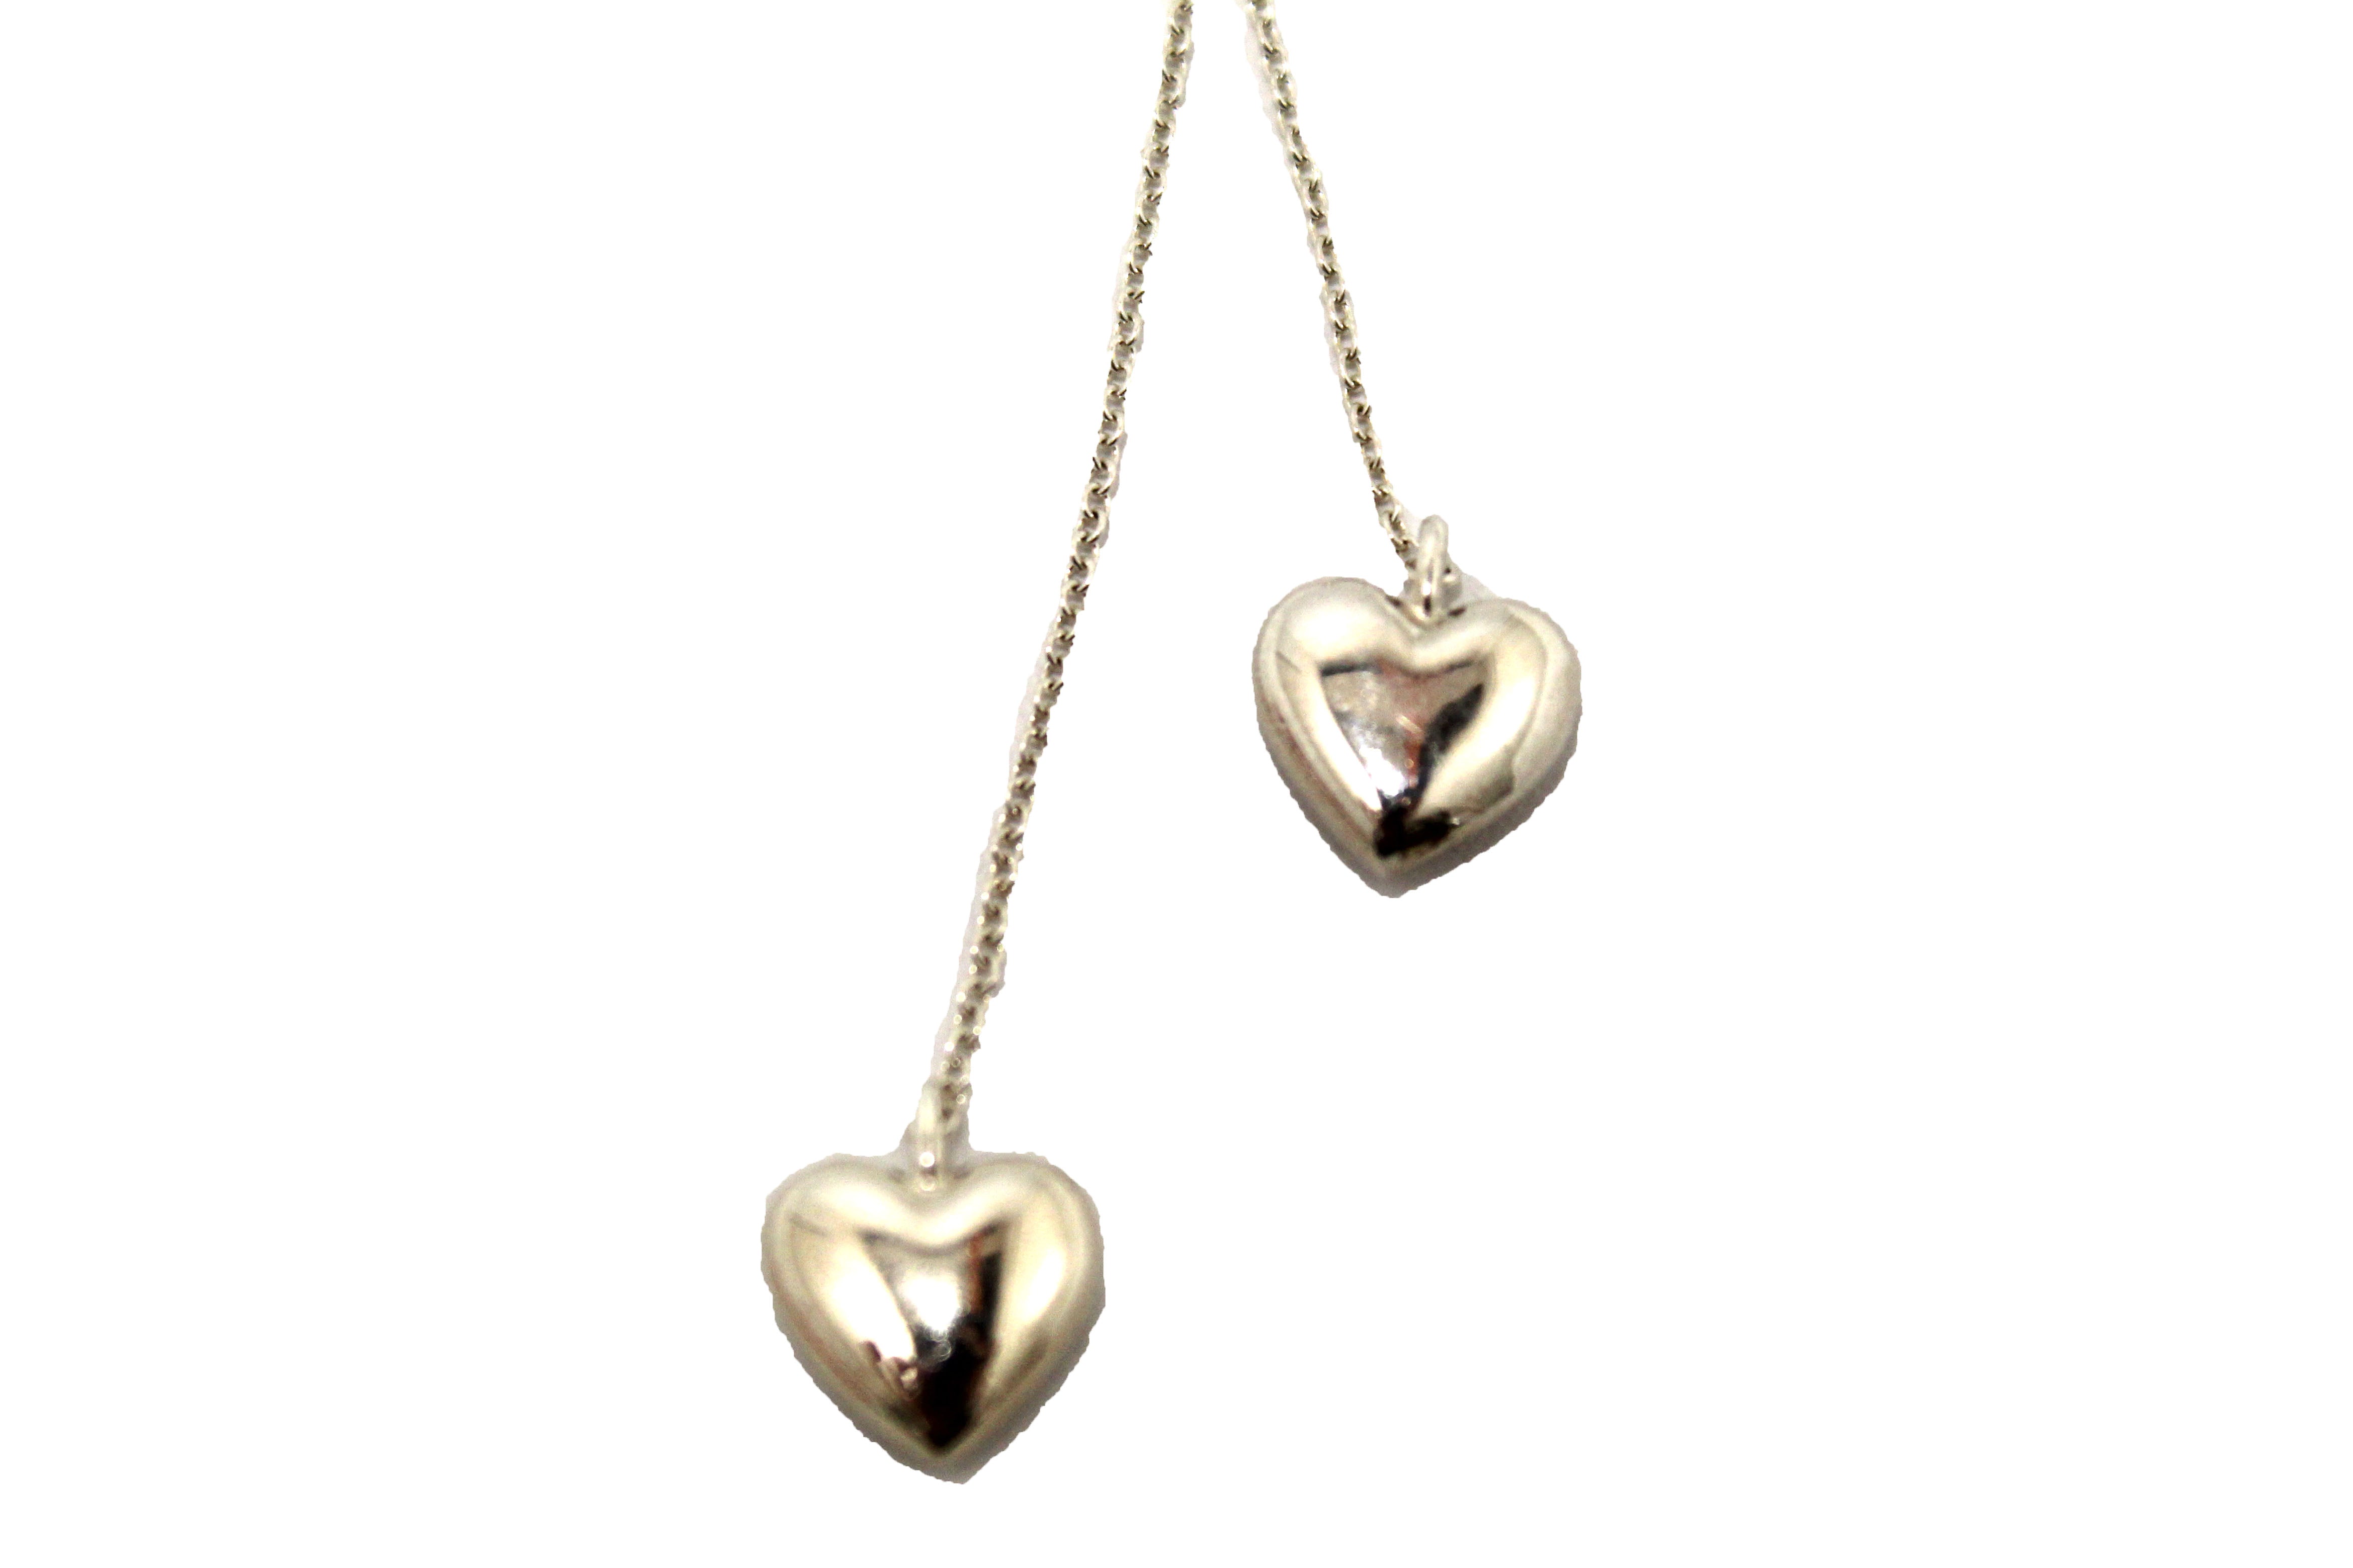 Authentic Tiffany & Co. Sterling Silver Double Drop Puffed Heart Dangling Lariat Necklace